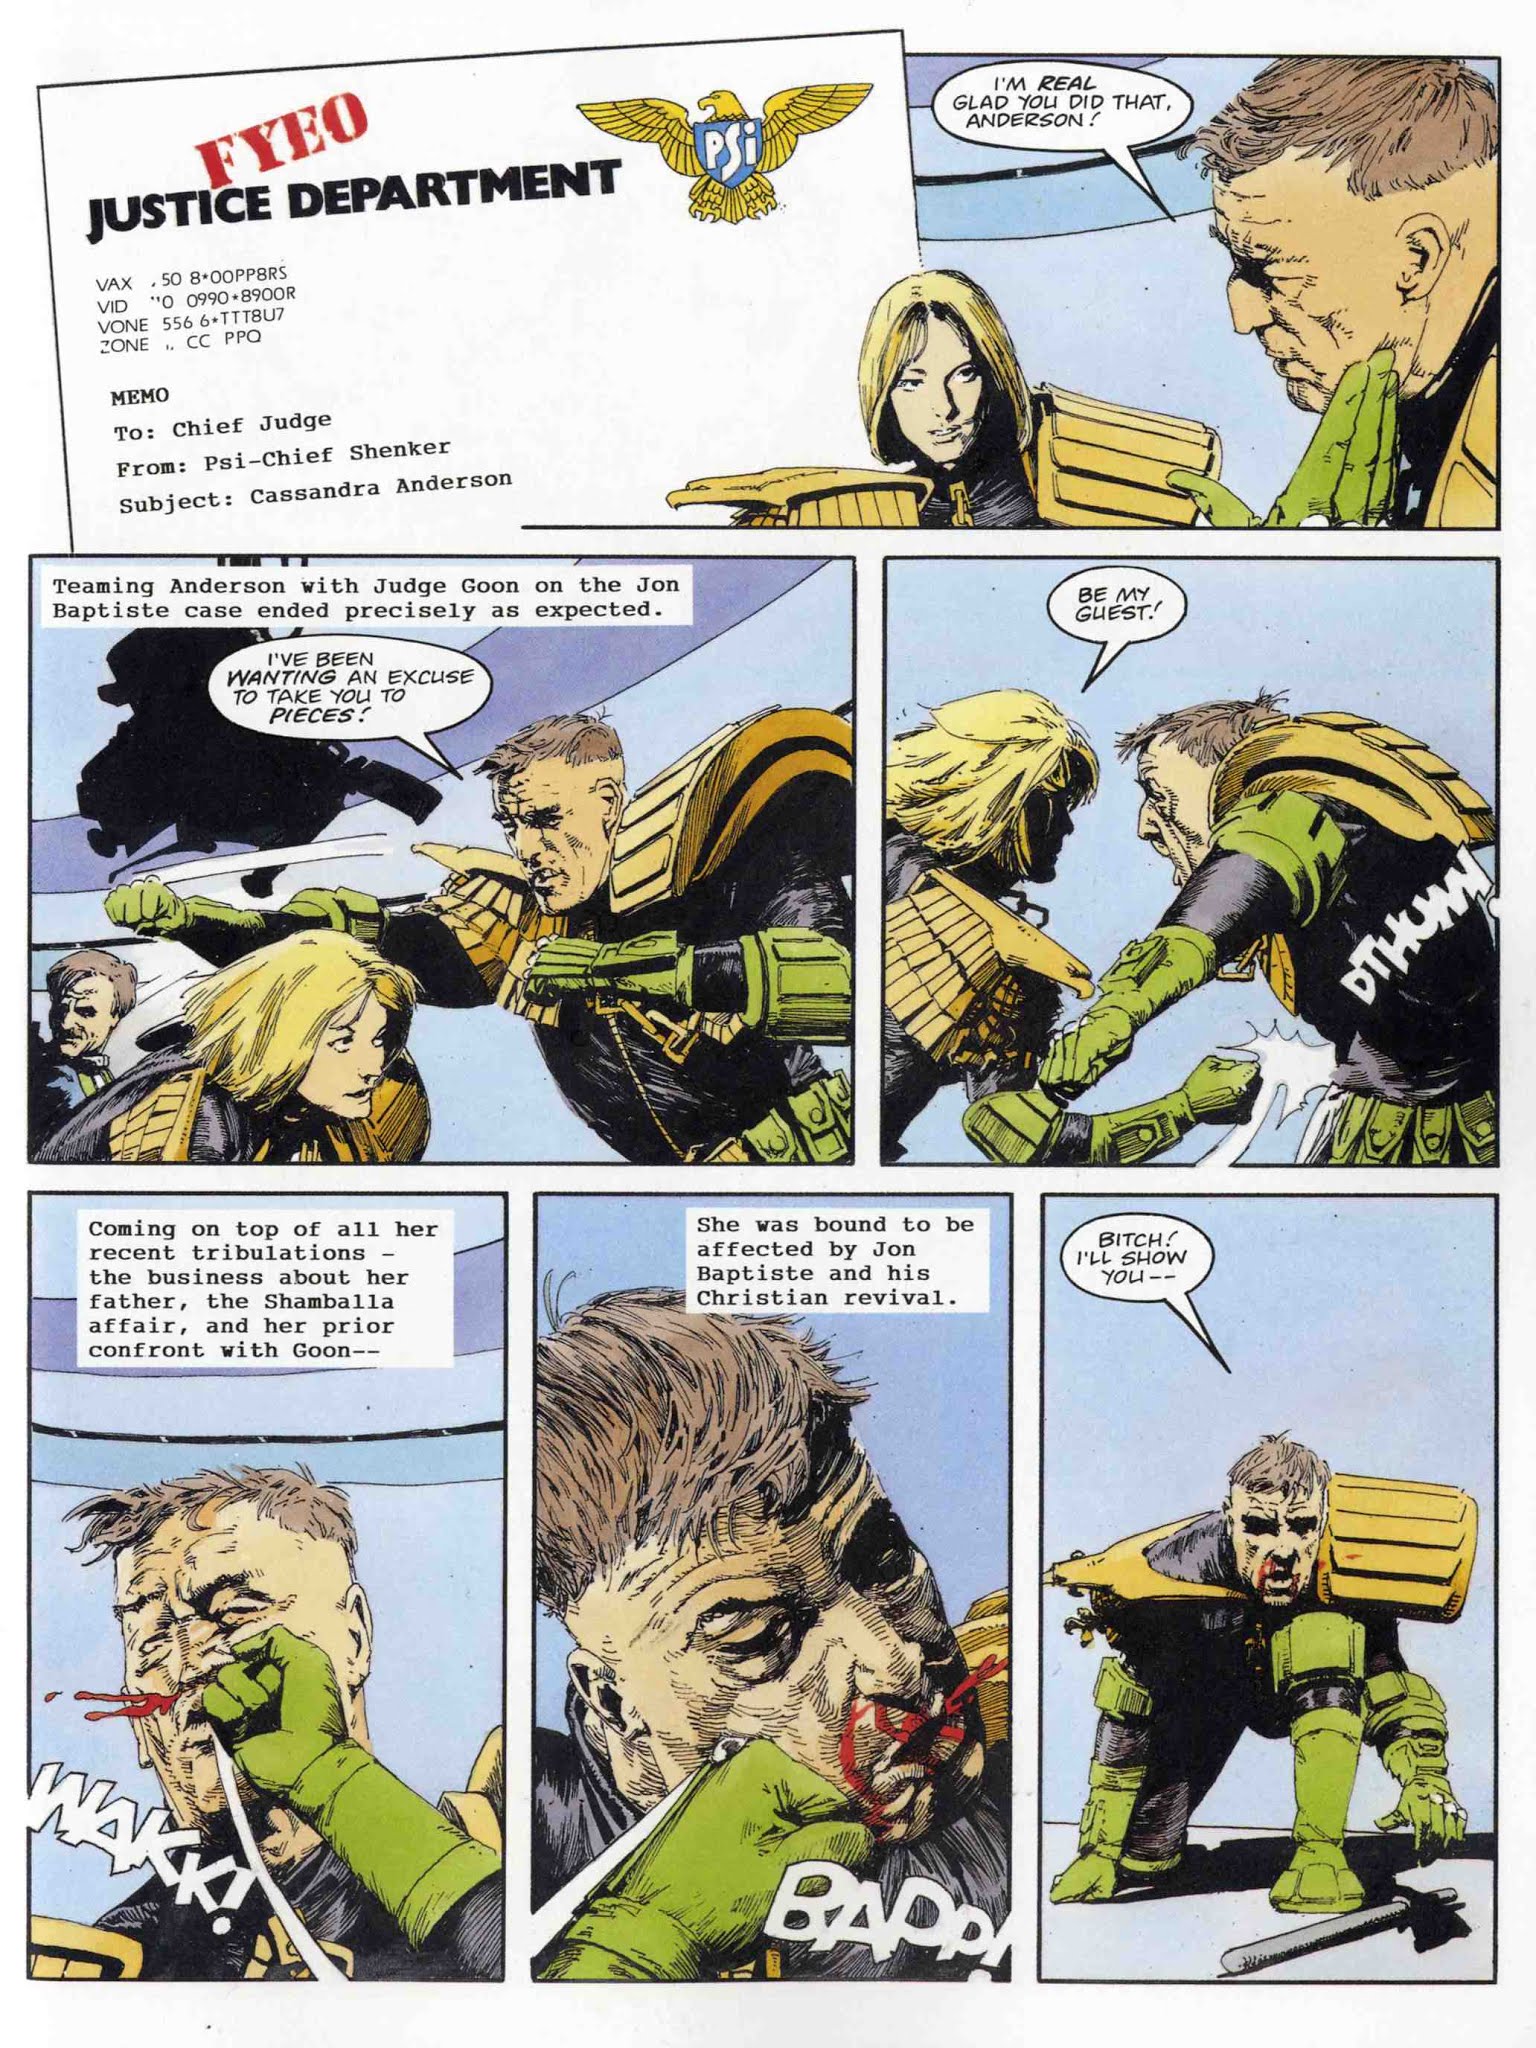 Read online Judge Anderson comic -  Issue # TPB - 17